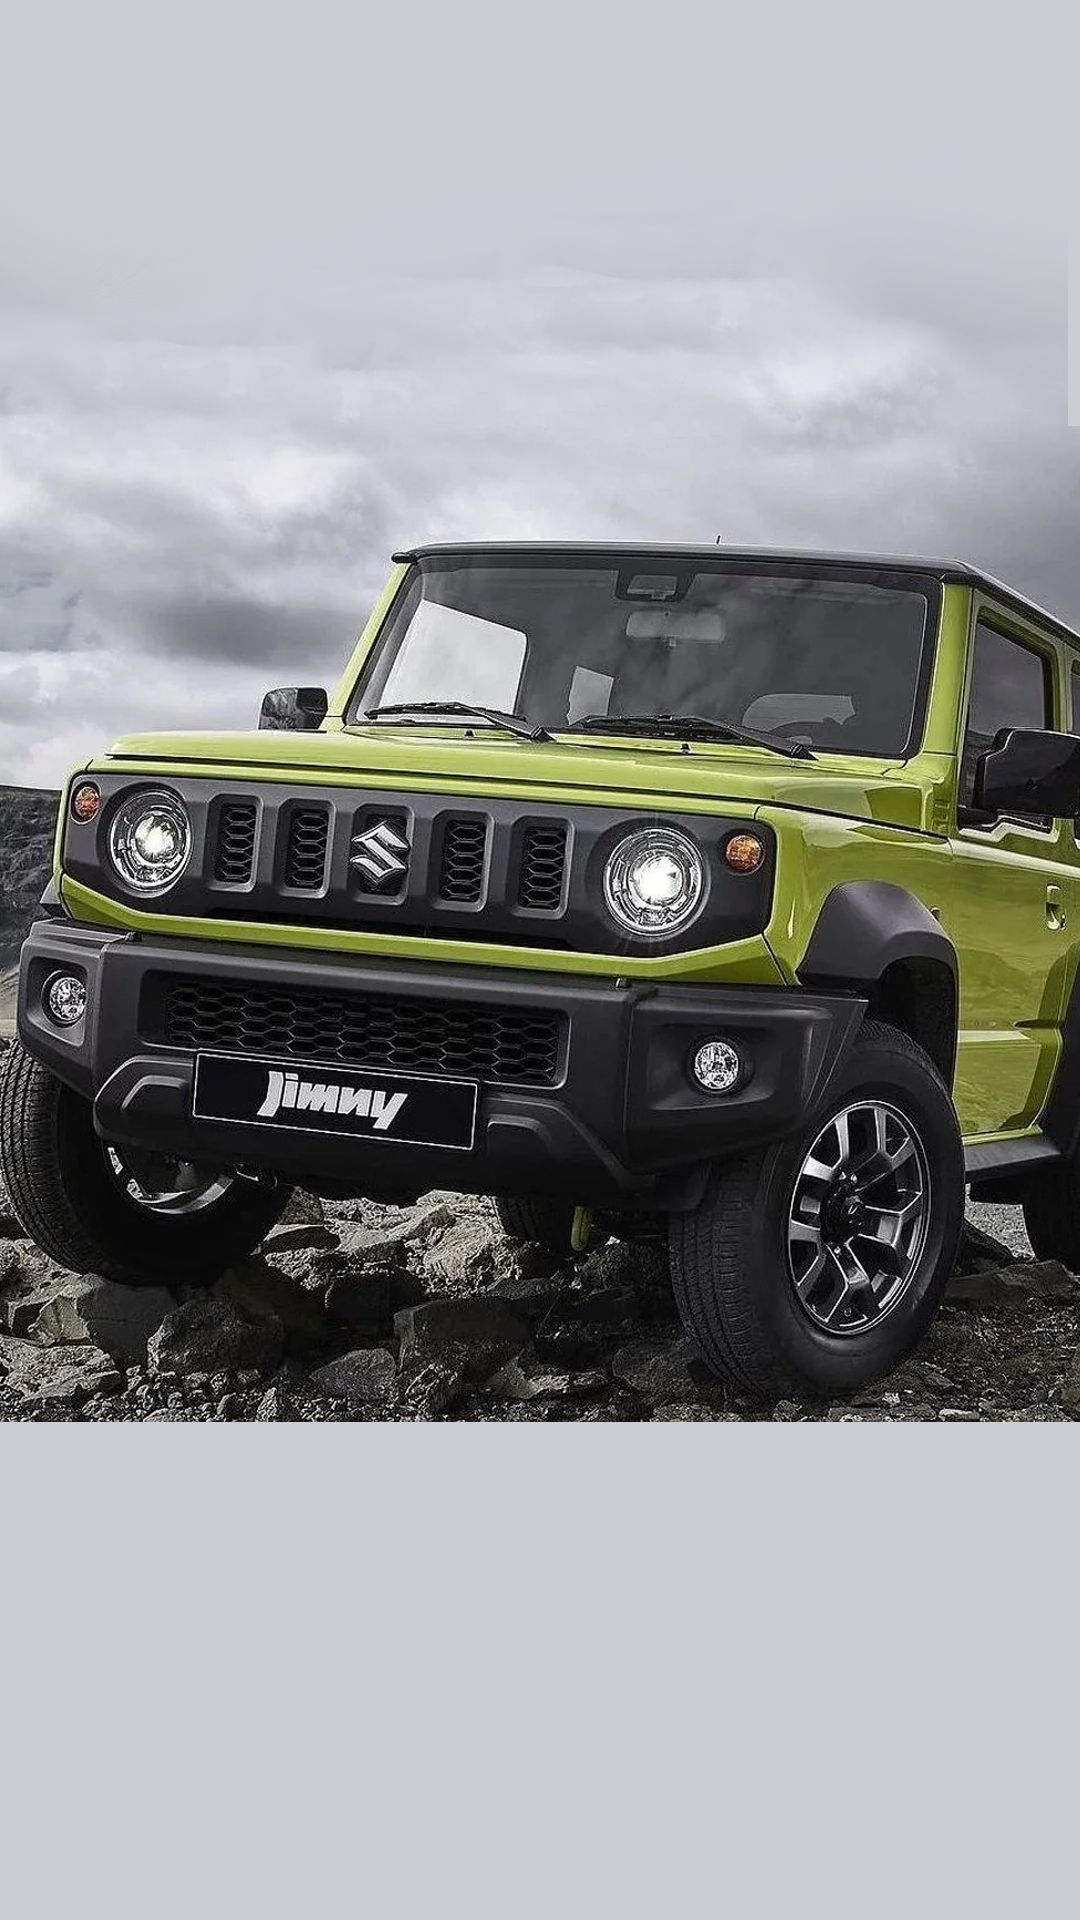 Maruti Jimny went viral before the launch at Auto Expo 2023- Here is everything you need to know 